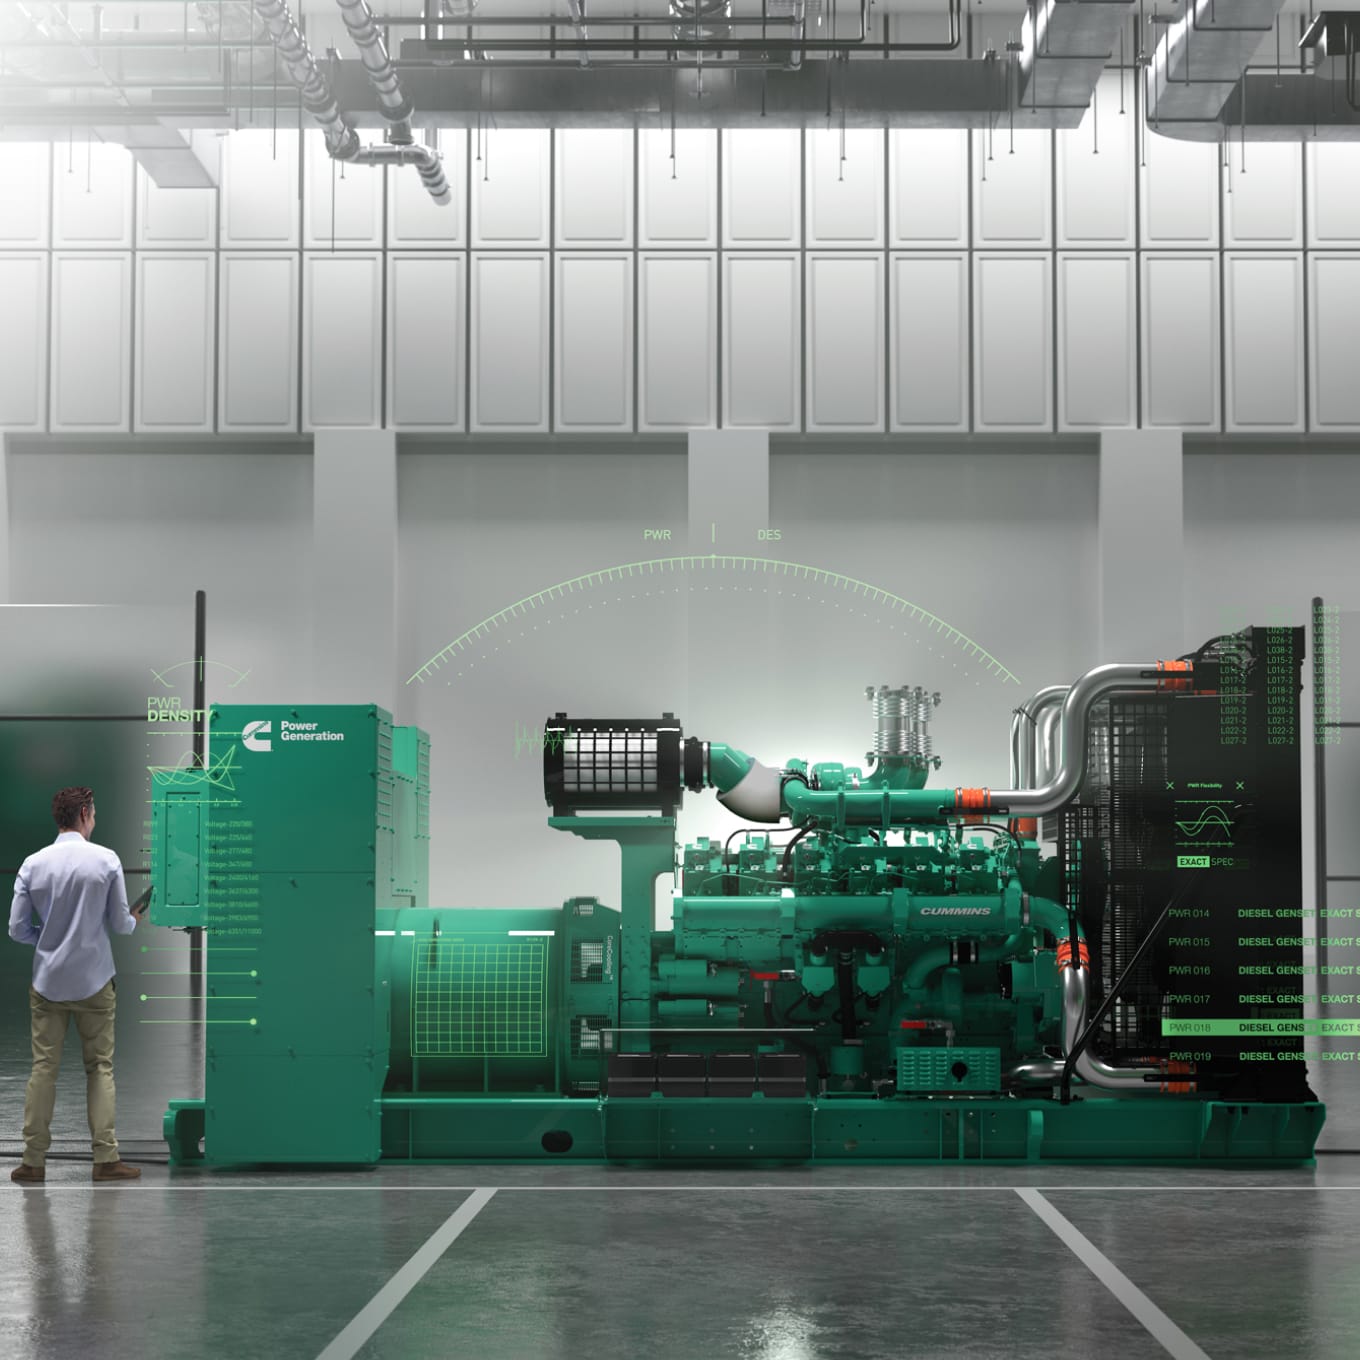 Rendering of the Cummins Centum™ Series Generator in a 3D environment with a person viewing it